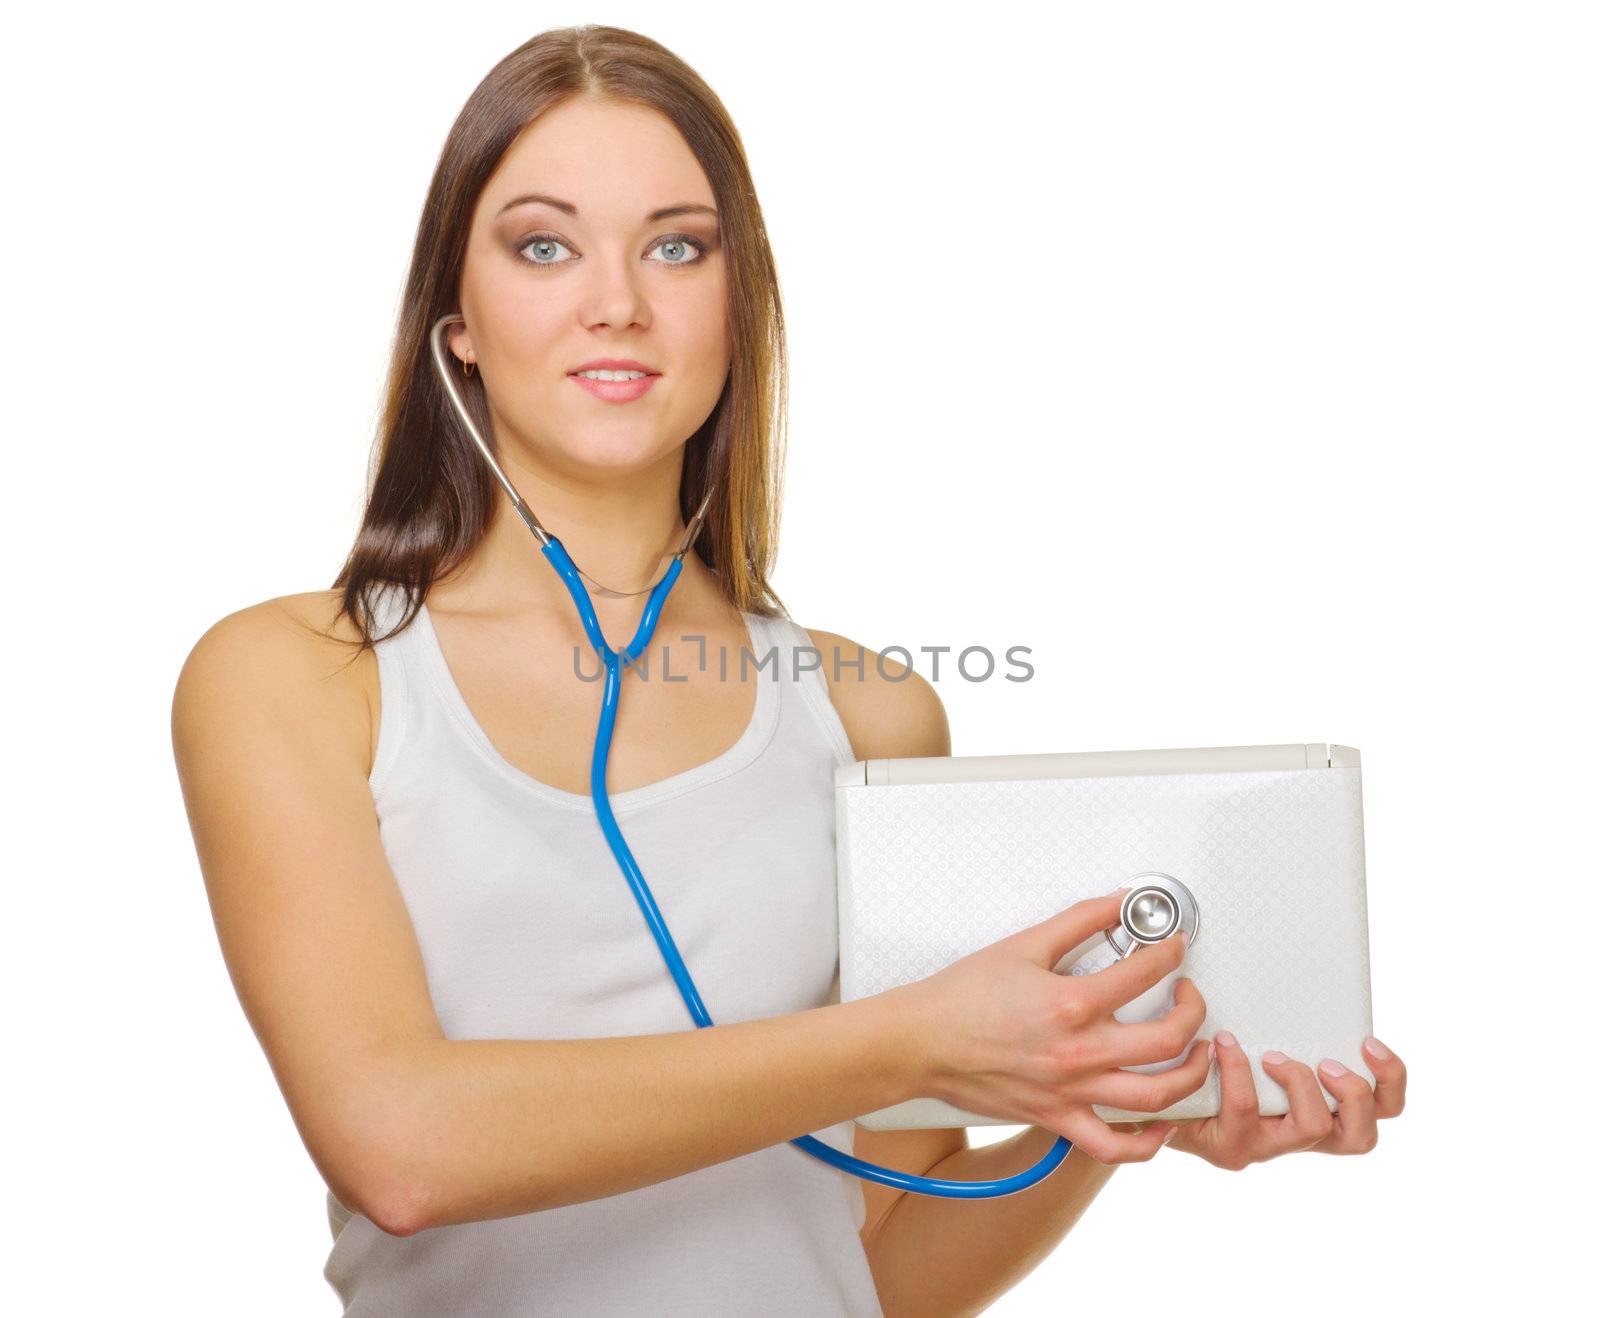 Young smiling girl with laptop and stethoscope isolated